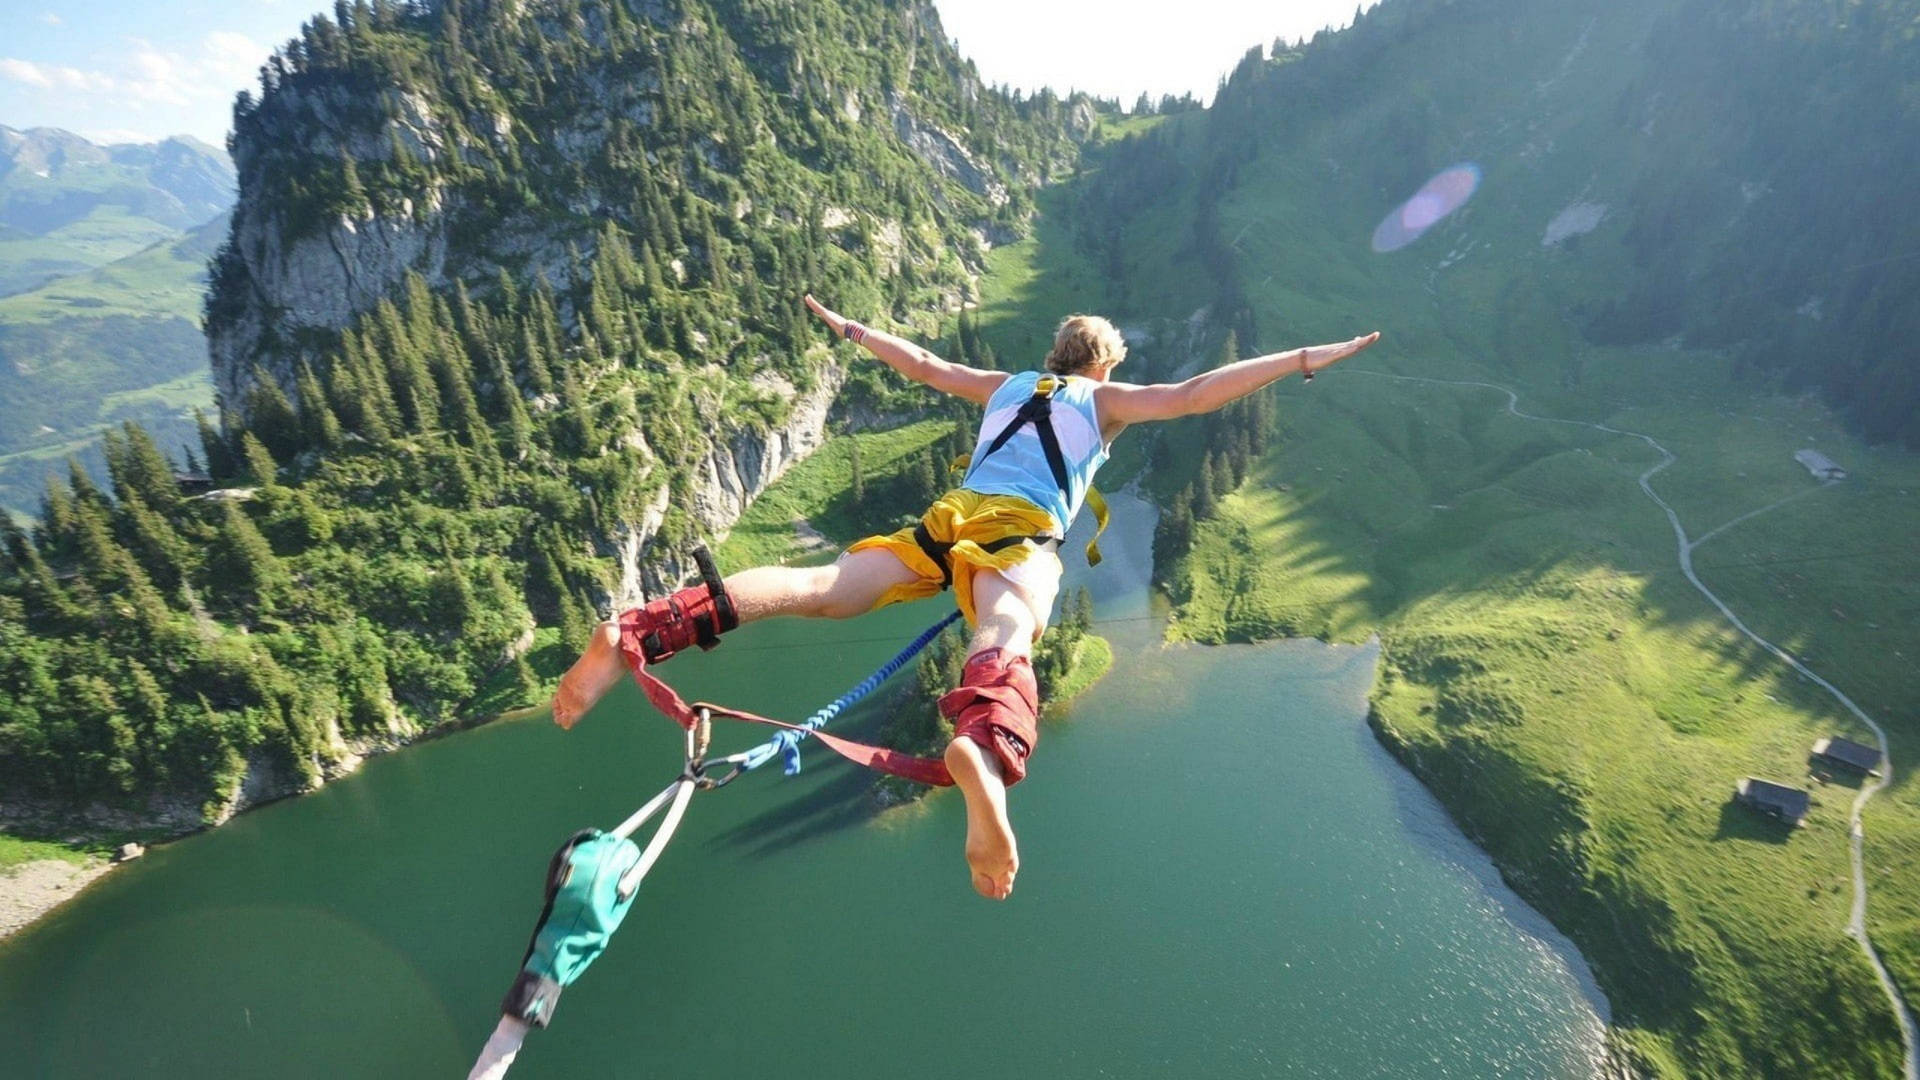 Extreme Sports Bungee Jumping Background